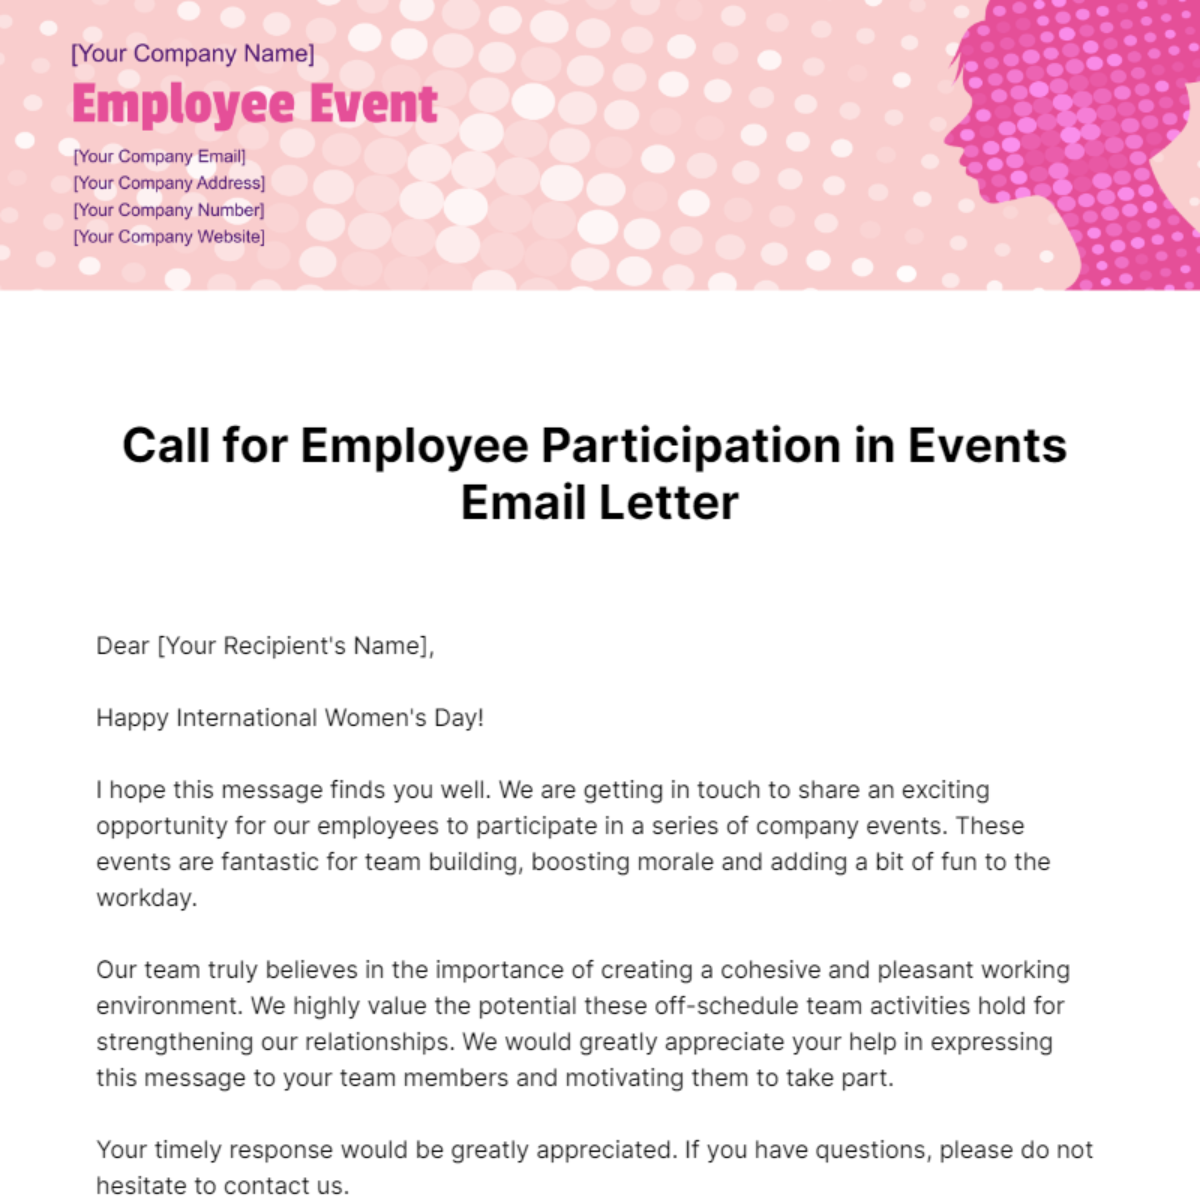 Call for Employee Participation in Events Email Letter Template